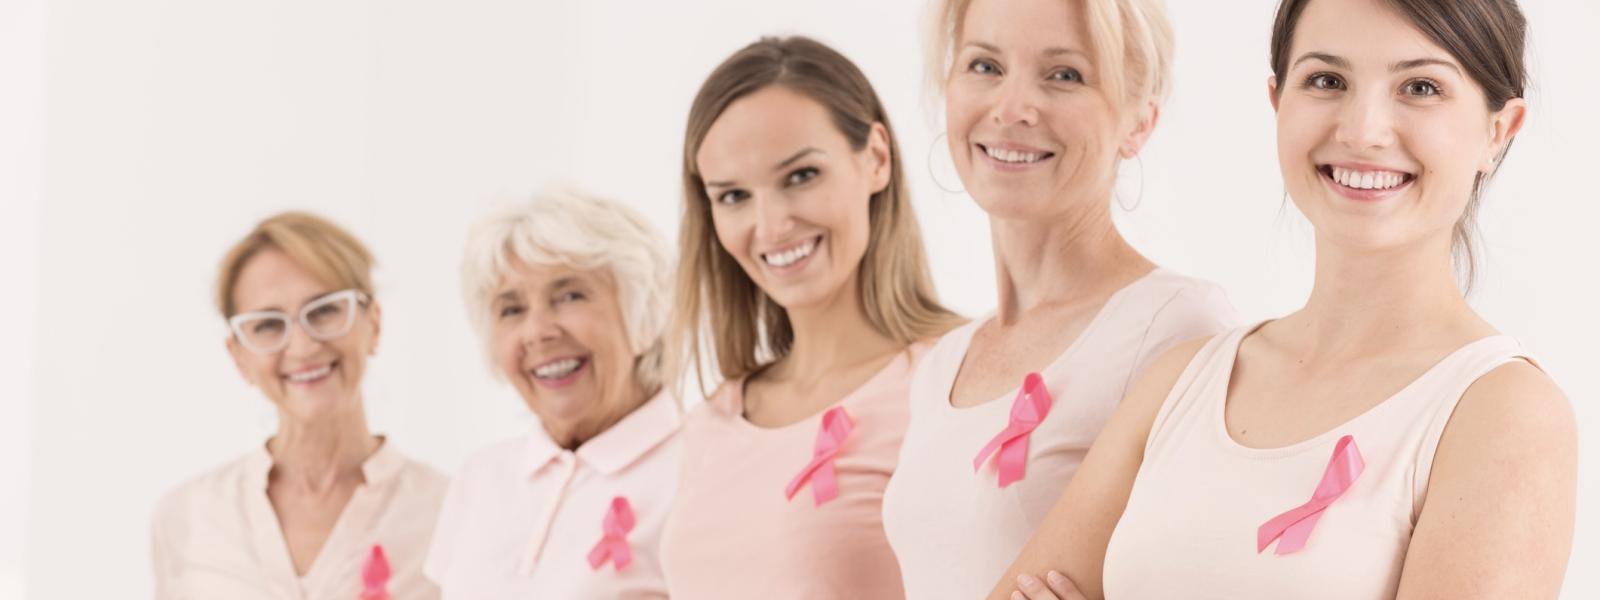 5 women wearing breast cancer awareness ribbons